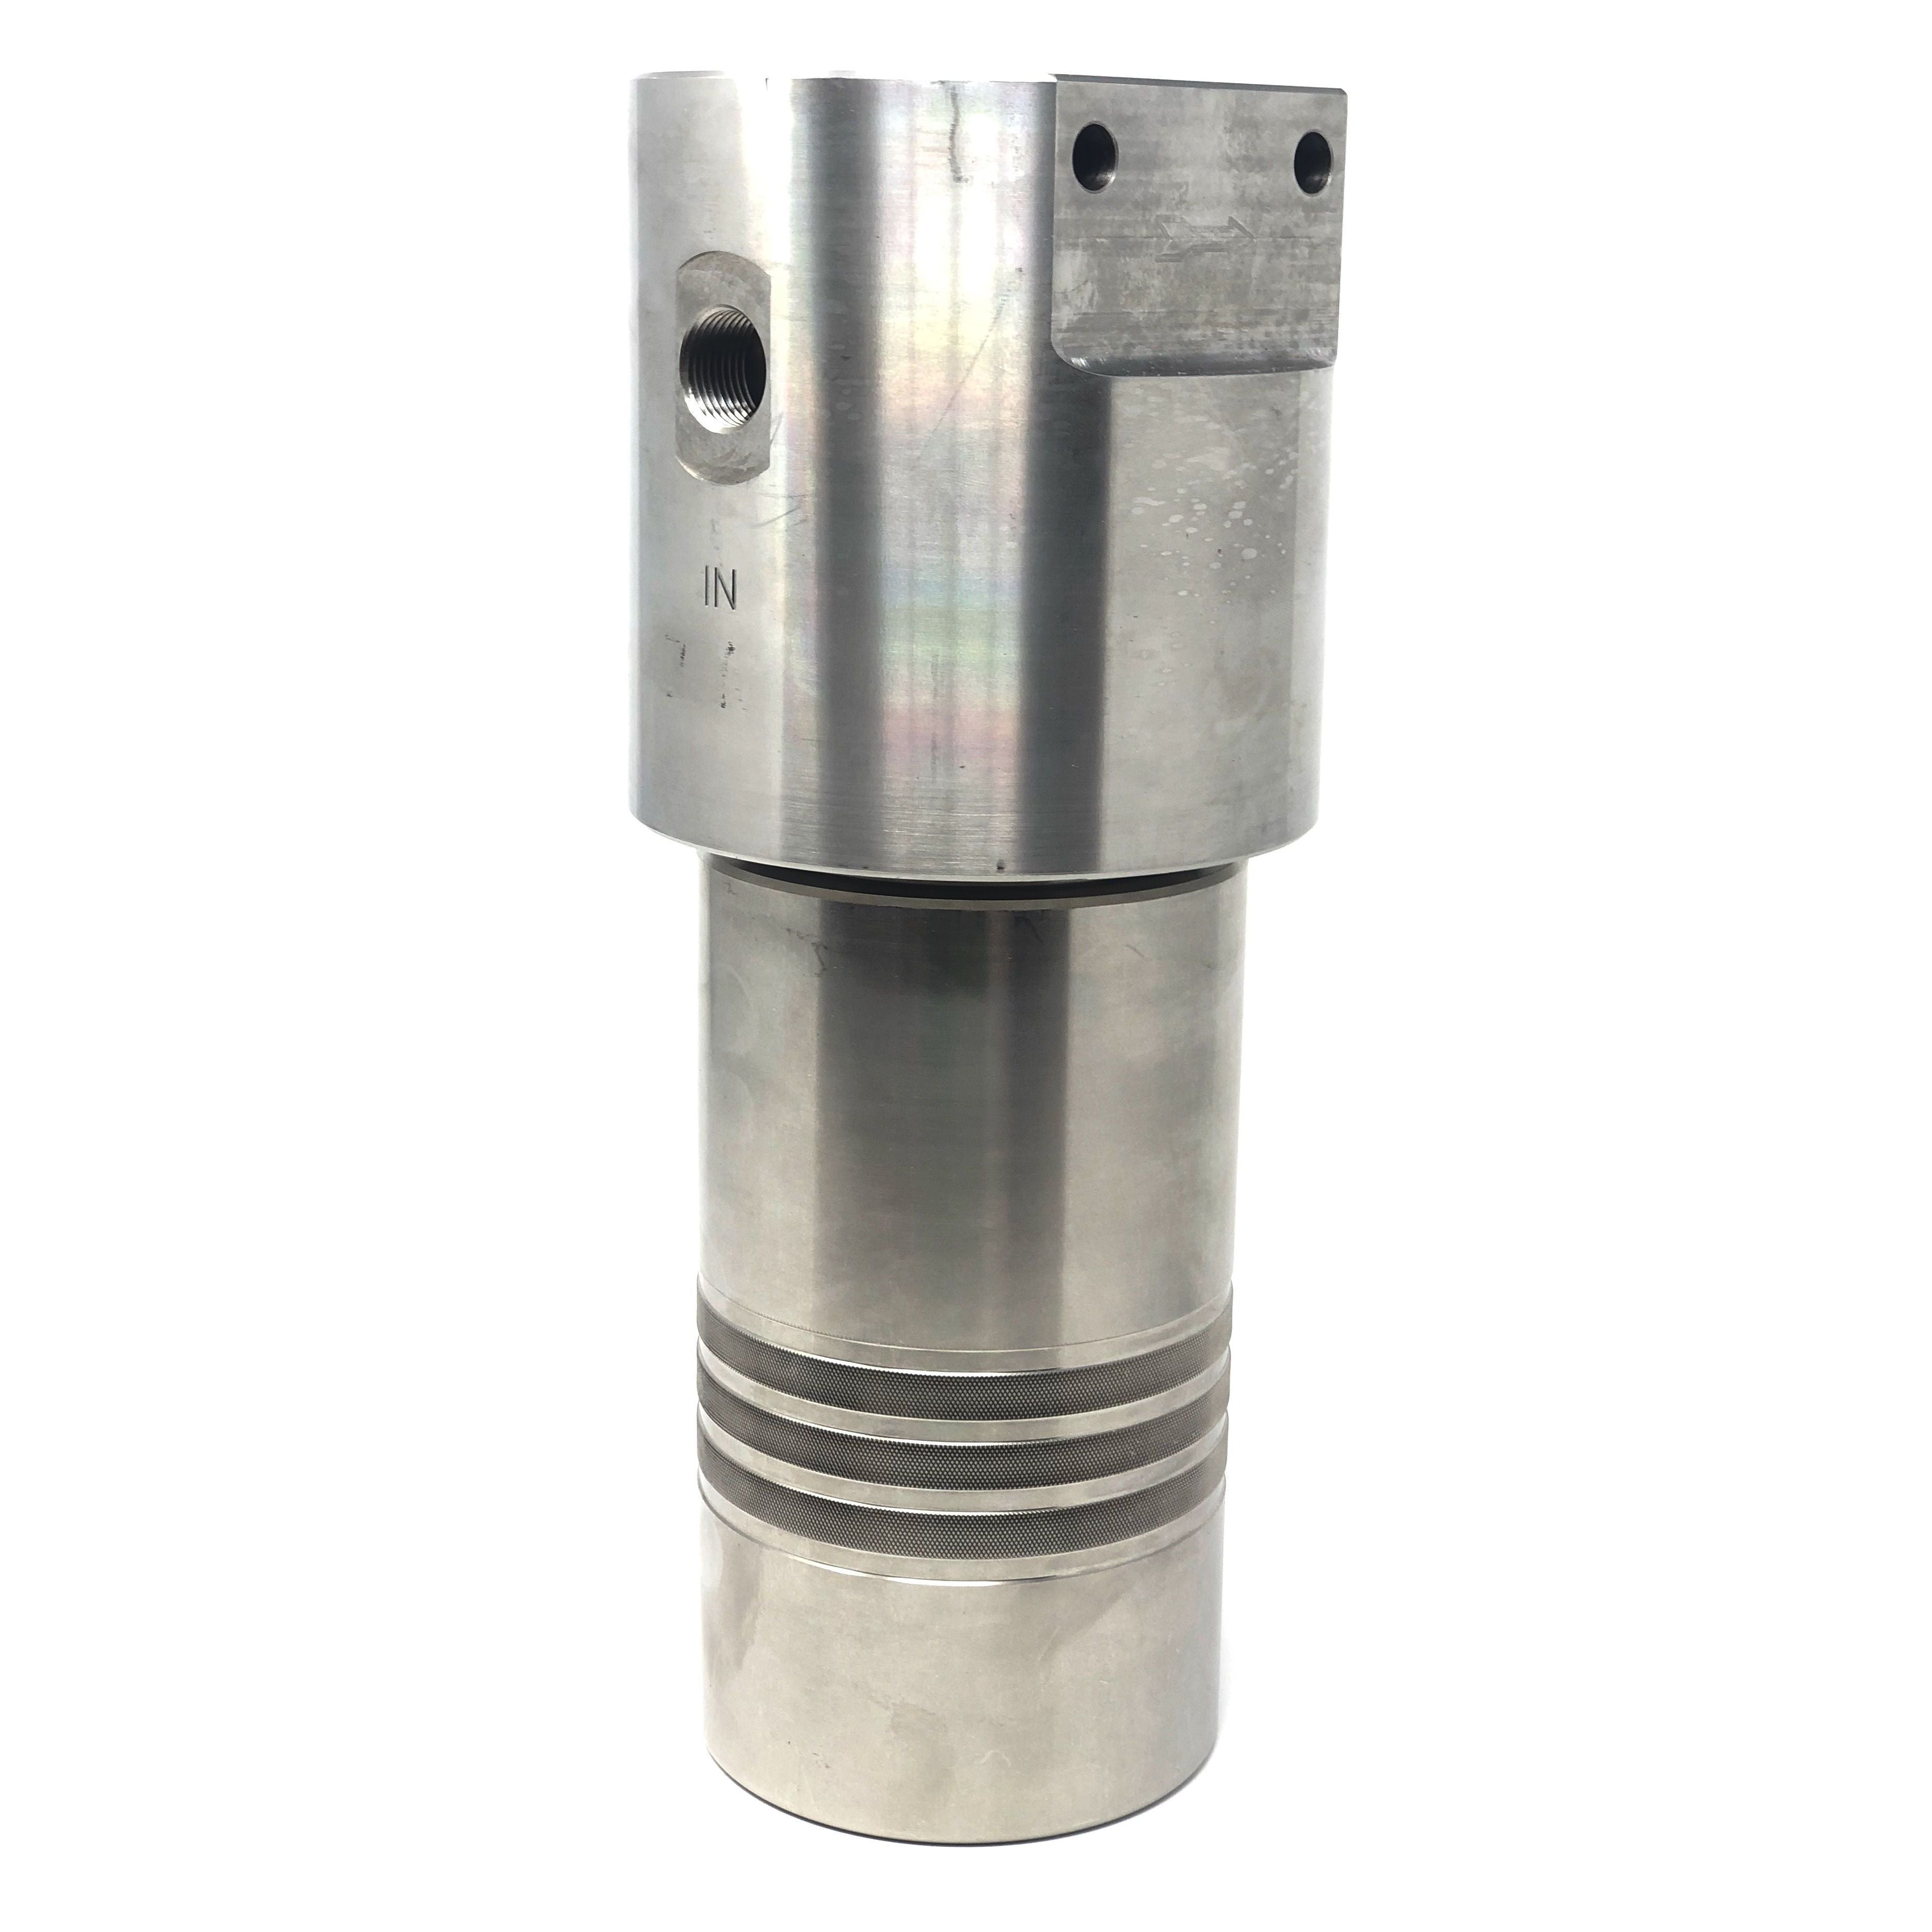 52S-248N-12MDN : Chase Ultra High Pressure Inline Filter, 10000psi, 1/2" NPT, 12 Micron, With Visual Indicator, No Bypass